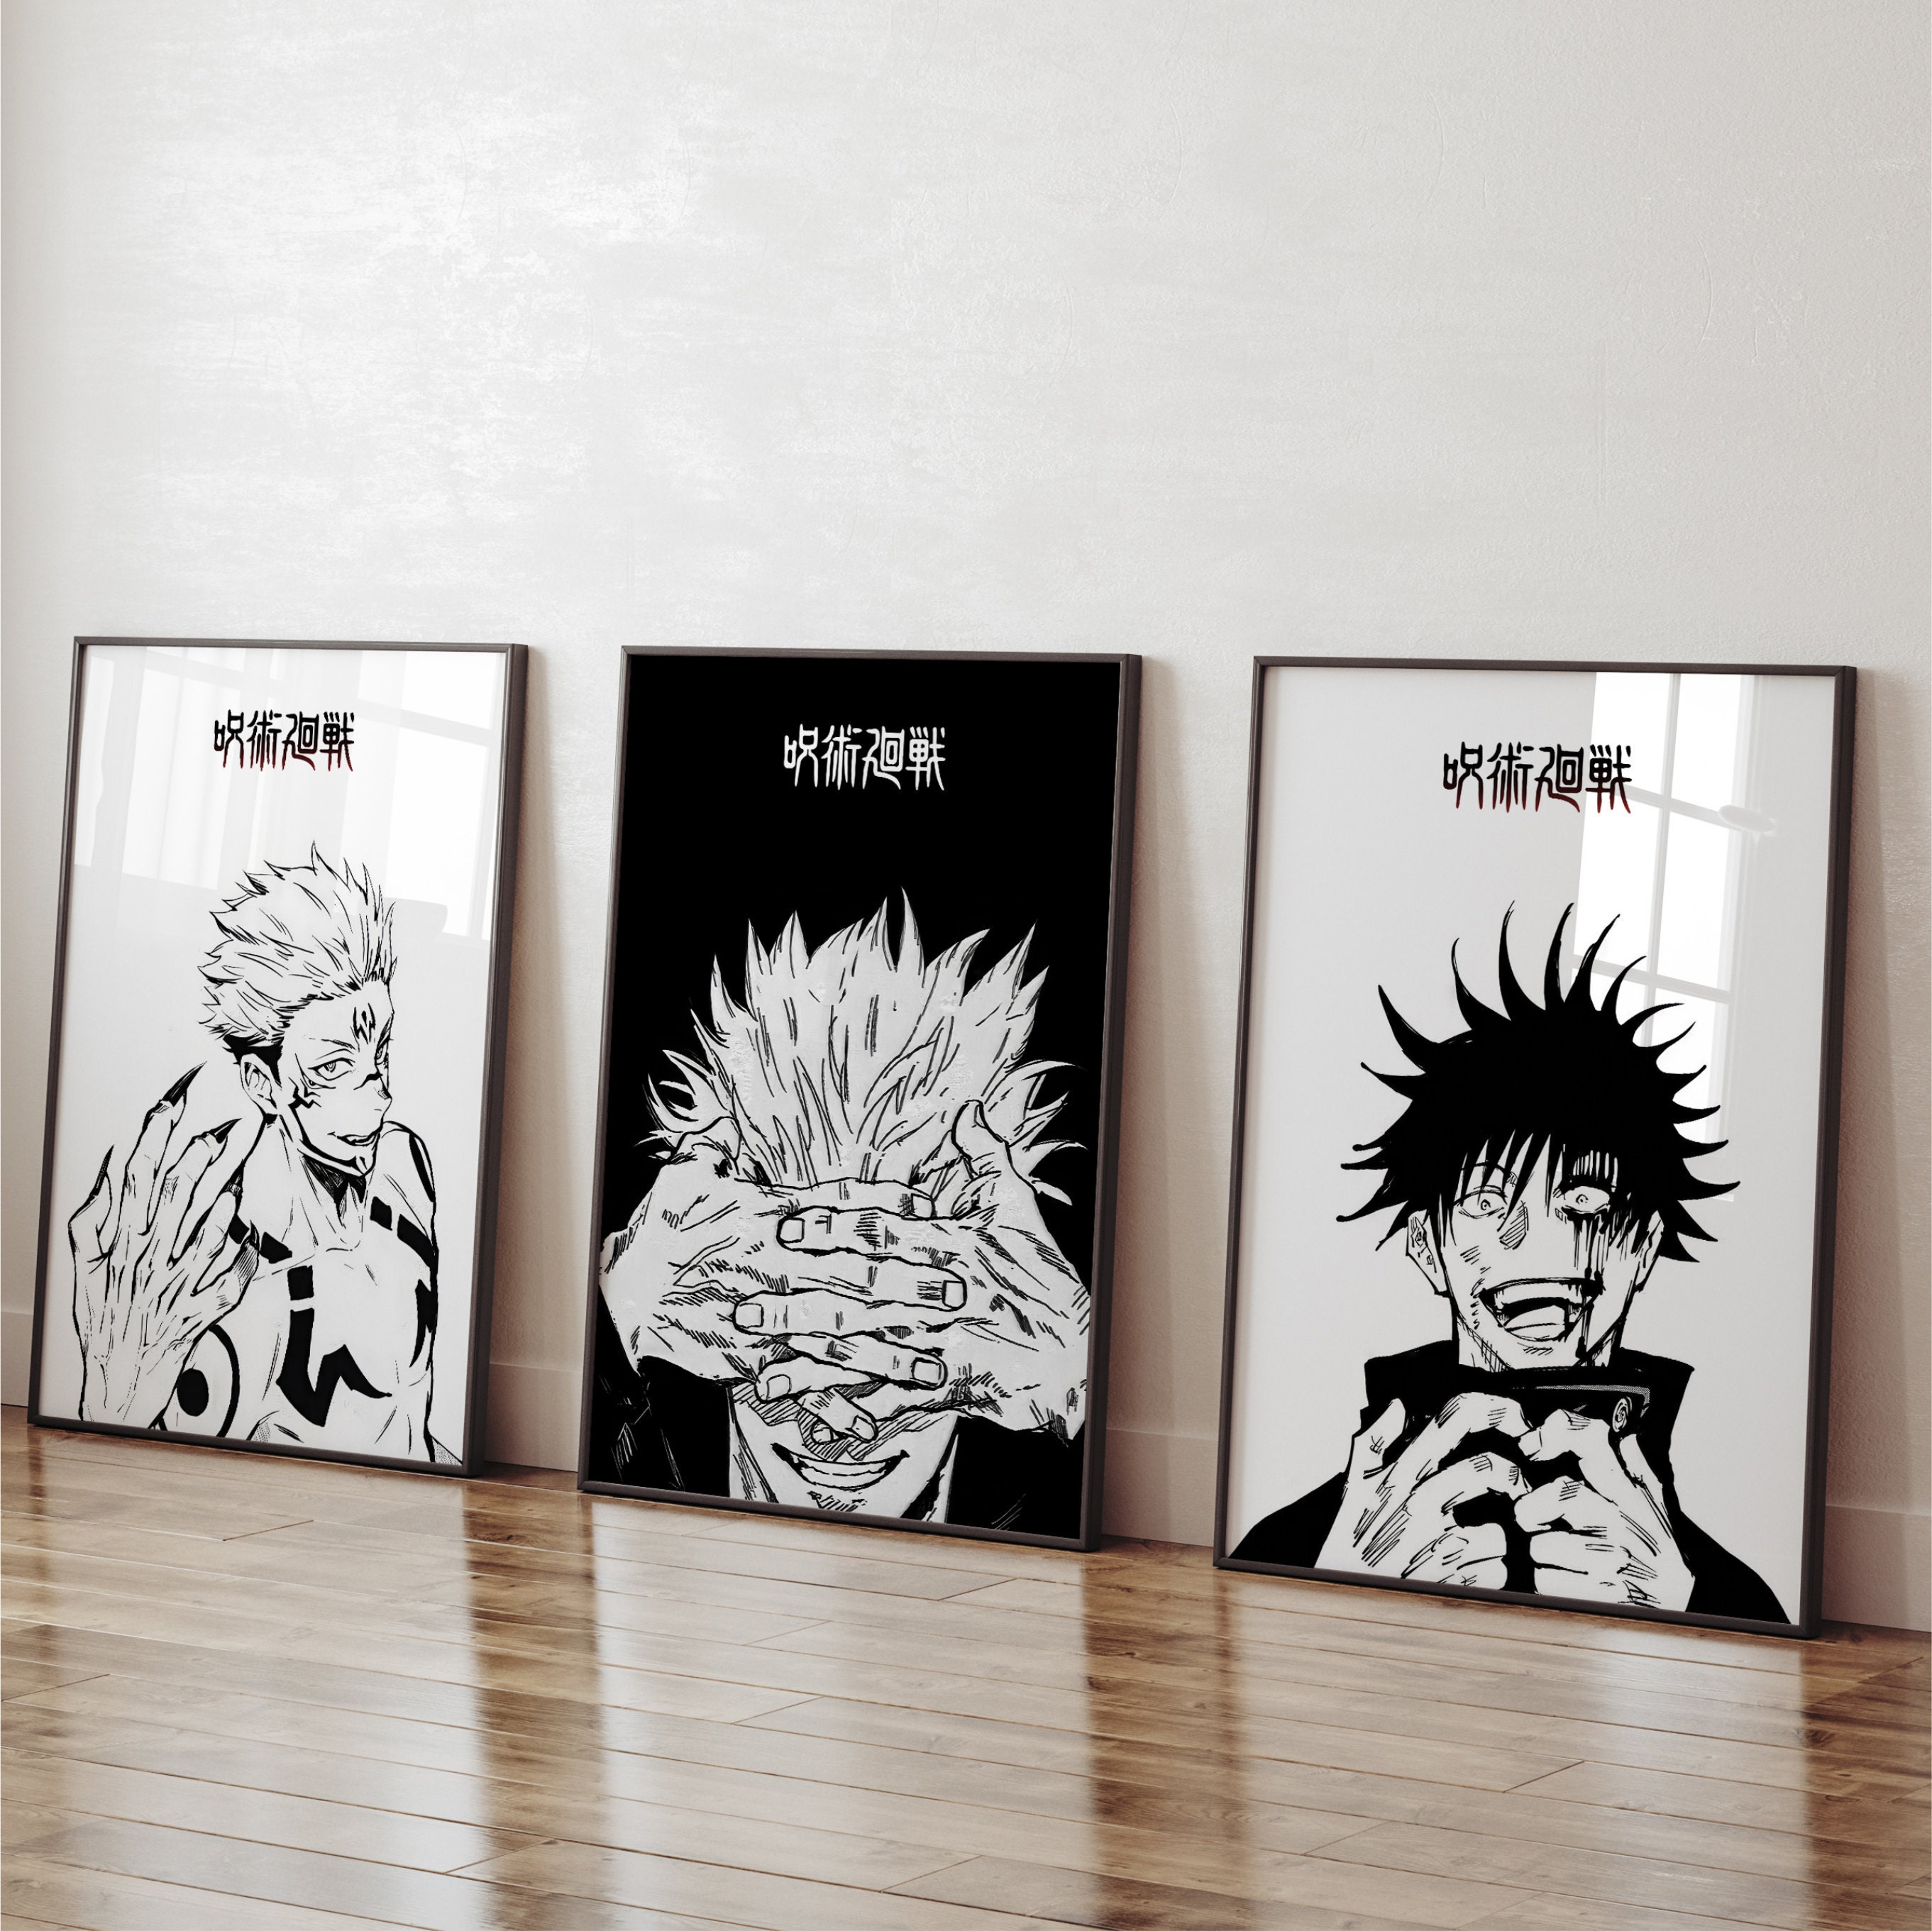  NUOTI Anime Hitori No Shita Under One Person Poster Season 1-3  Three Panel Poster Decorative Painting Canvas Wall Art Living Room Posters  Bedroom Painting 08x12inch(20x30cm) : לבית ולמטבח